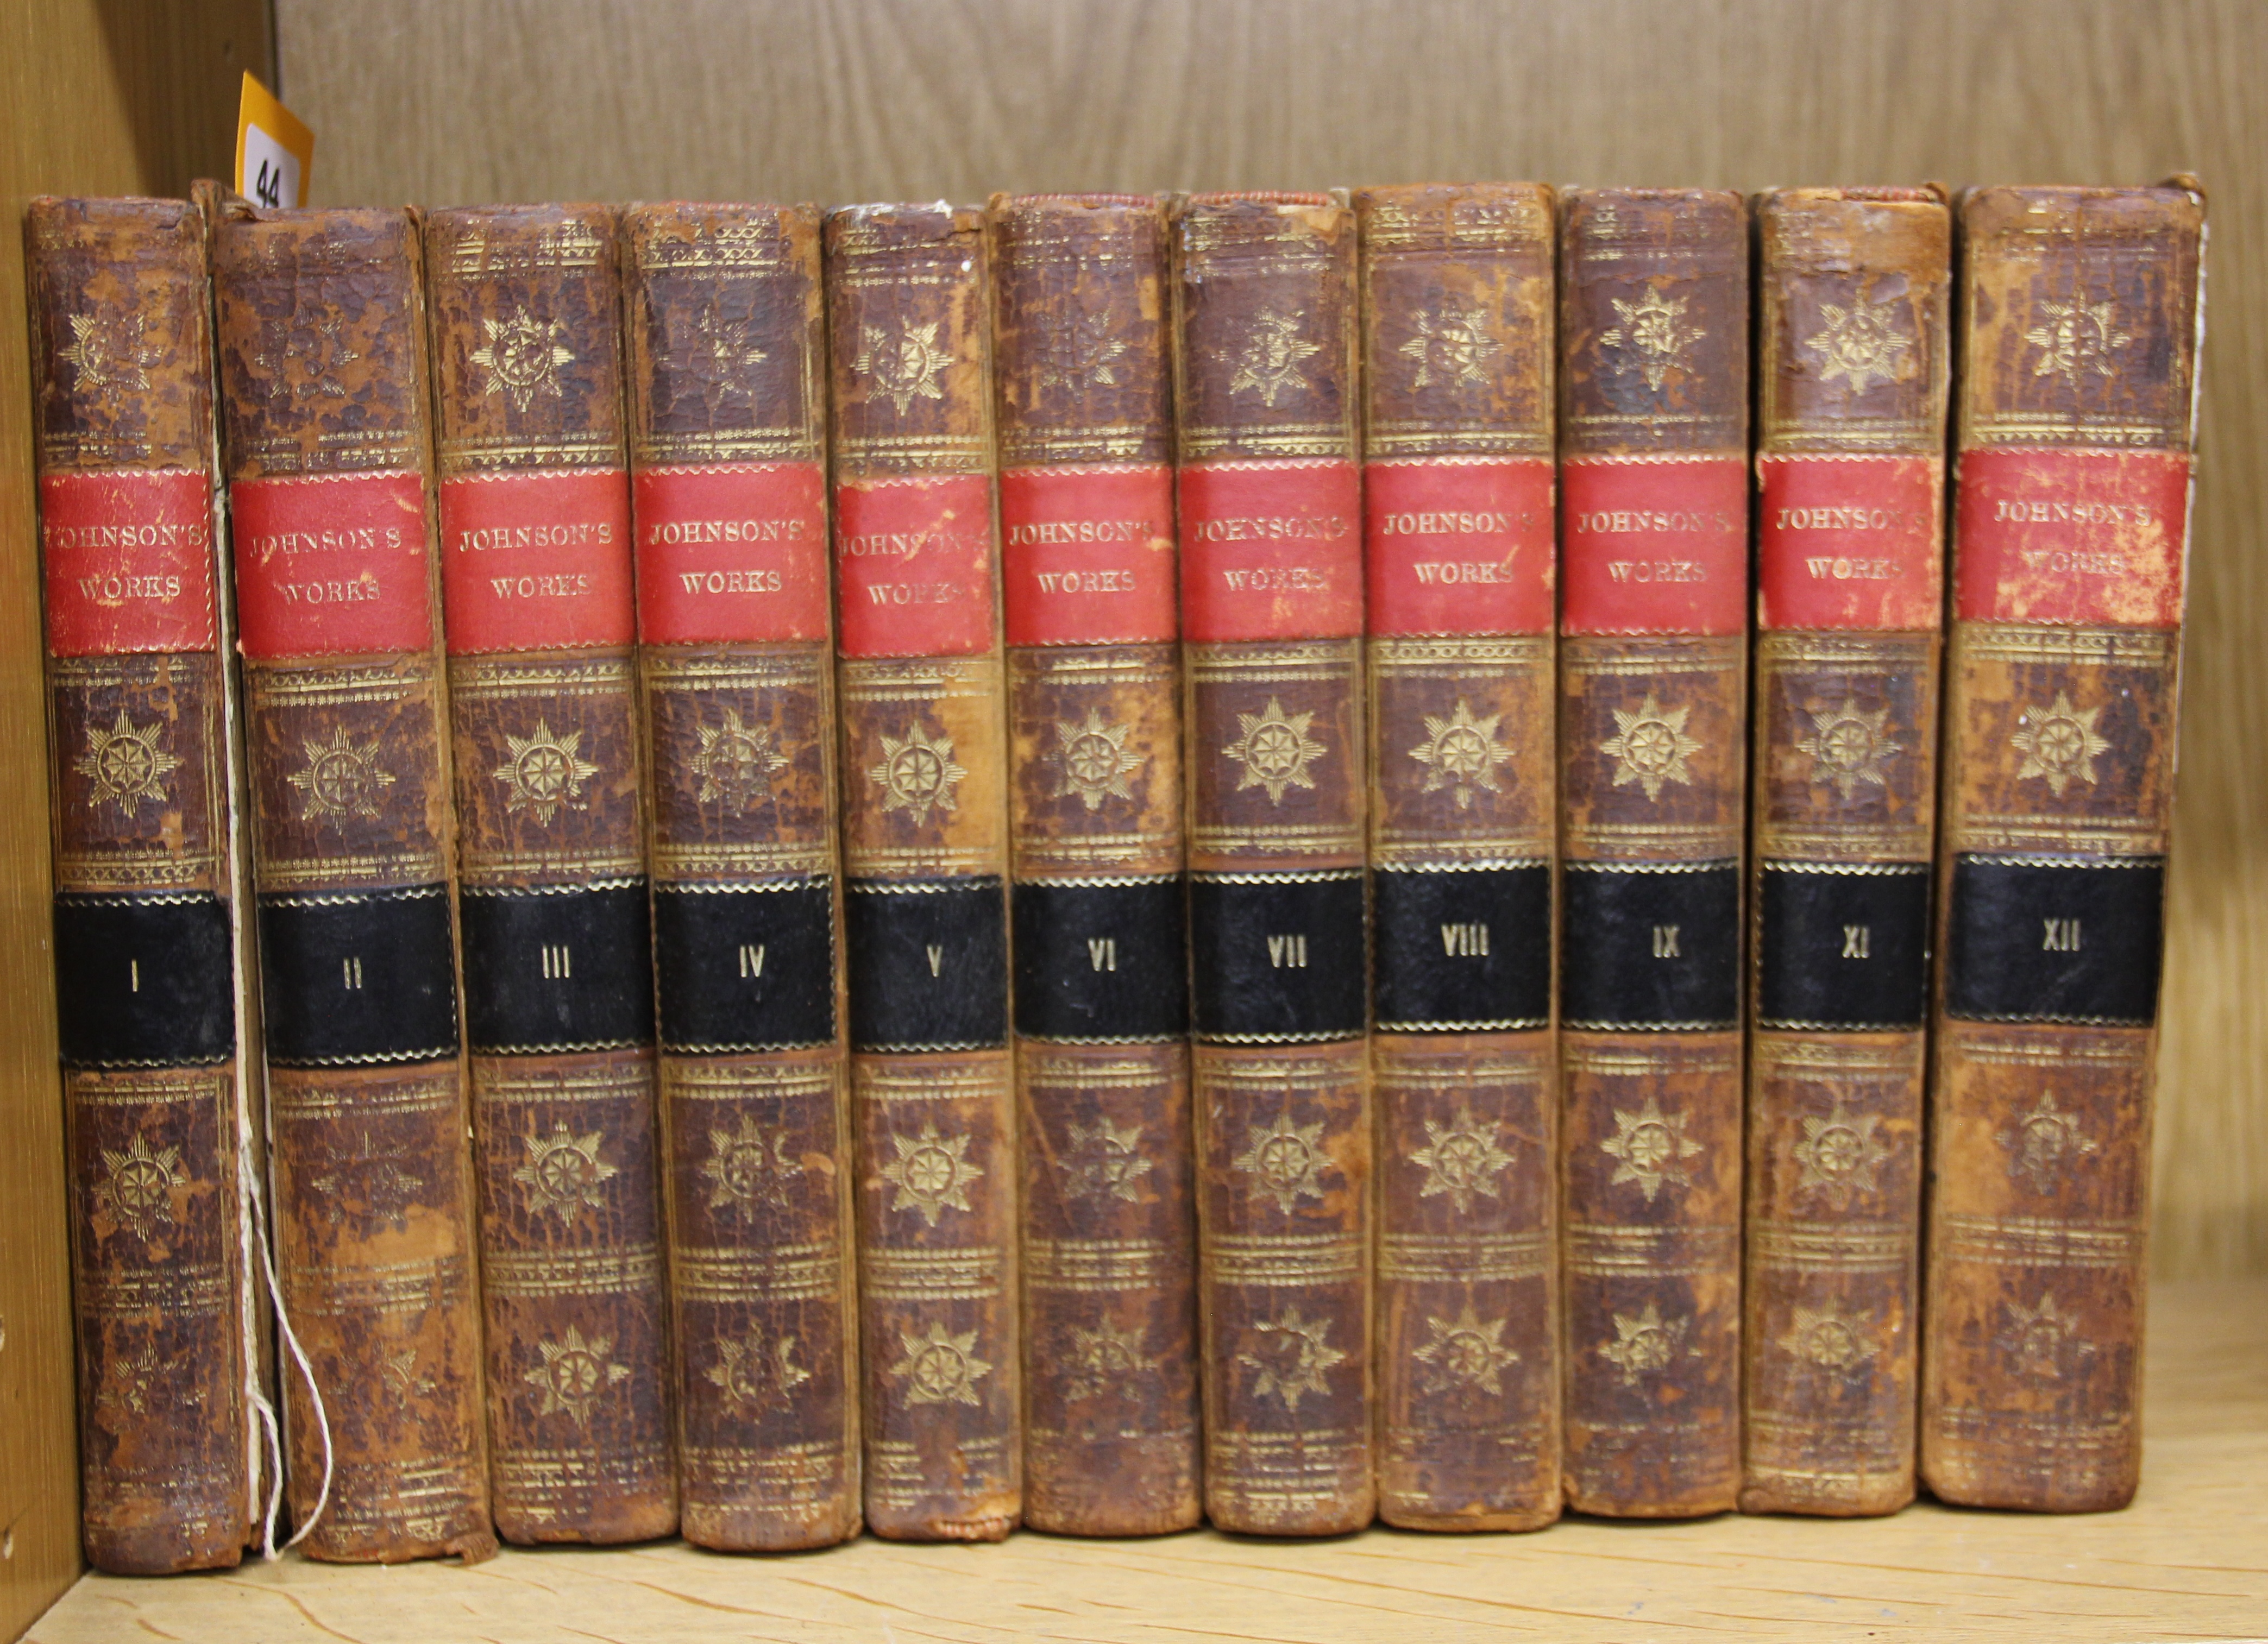 11 leather bound volumes of 12 of the works of Samuel Johnson new edition c. 1792. Volume 10